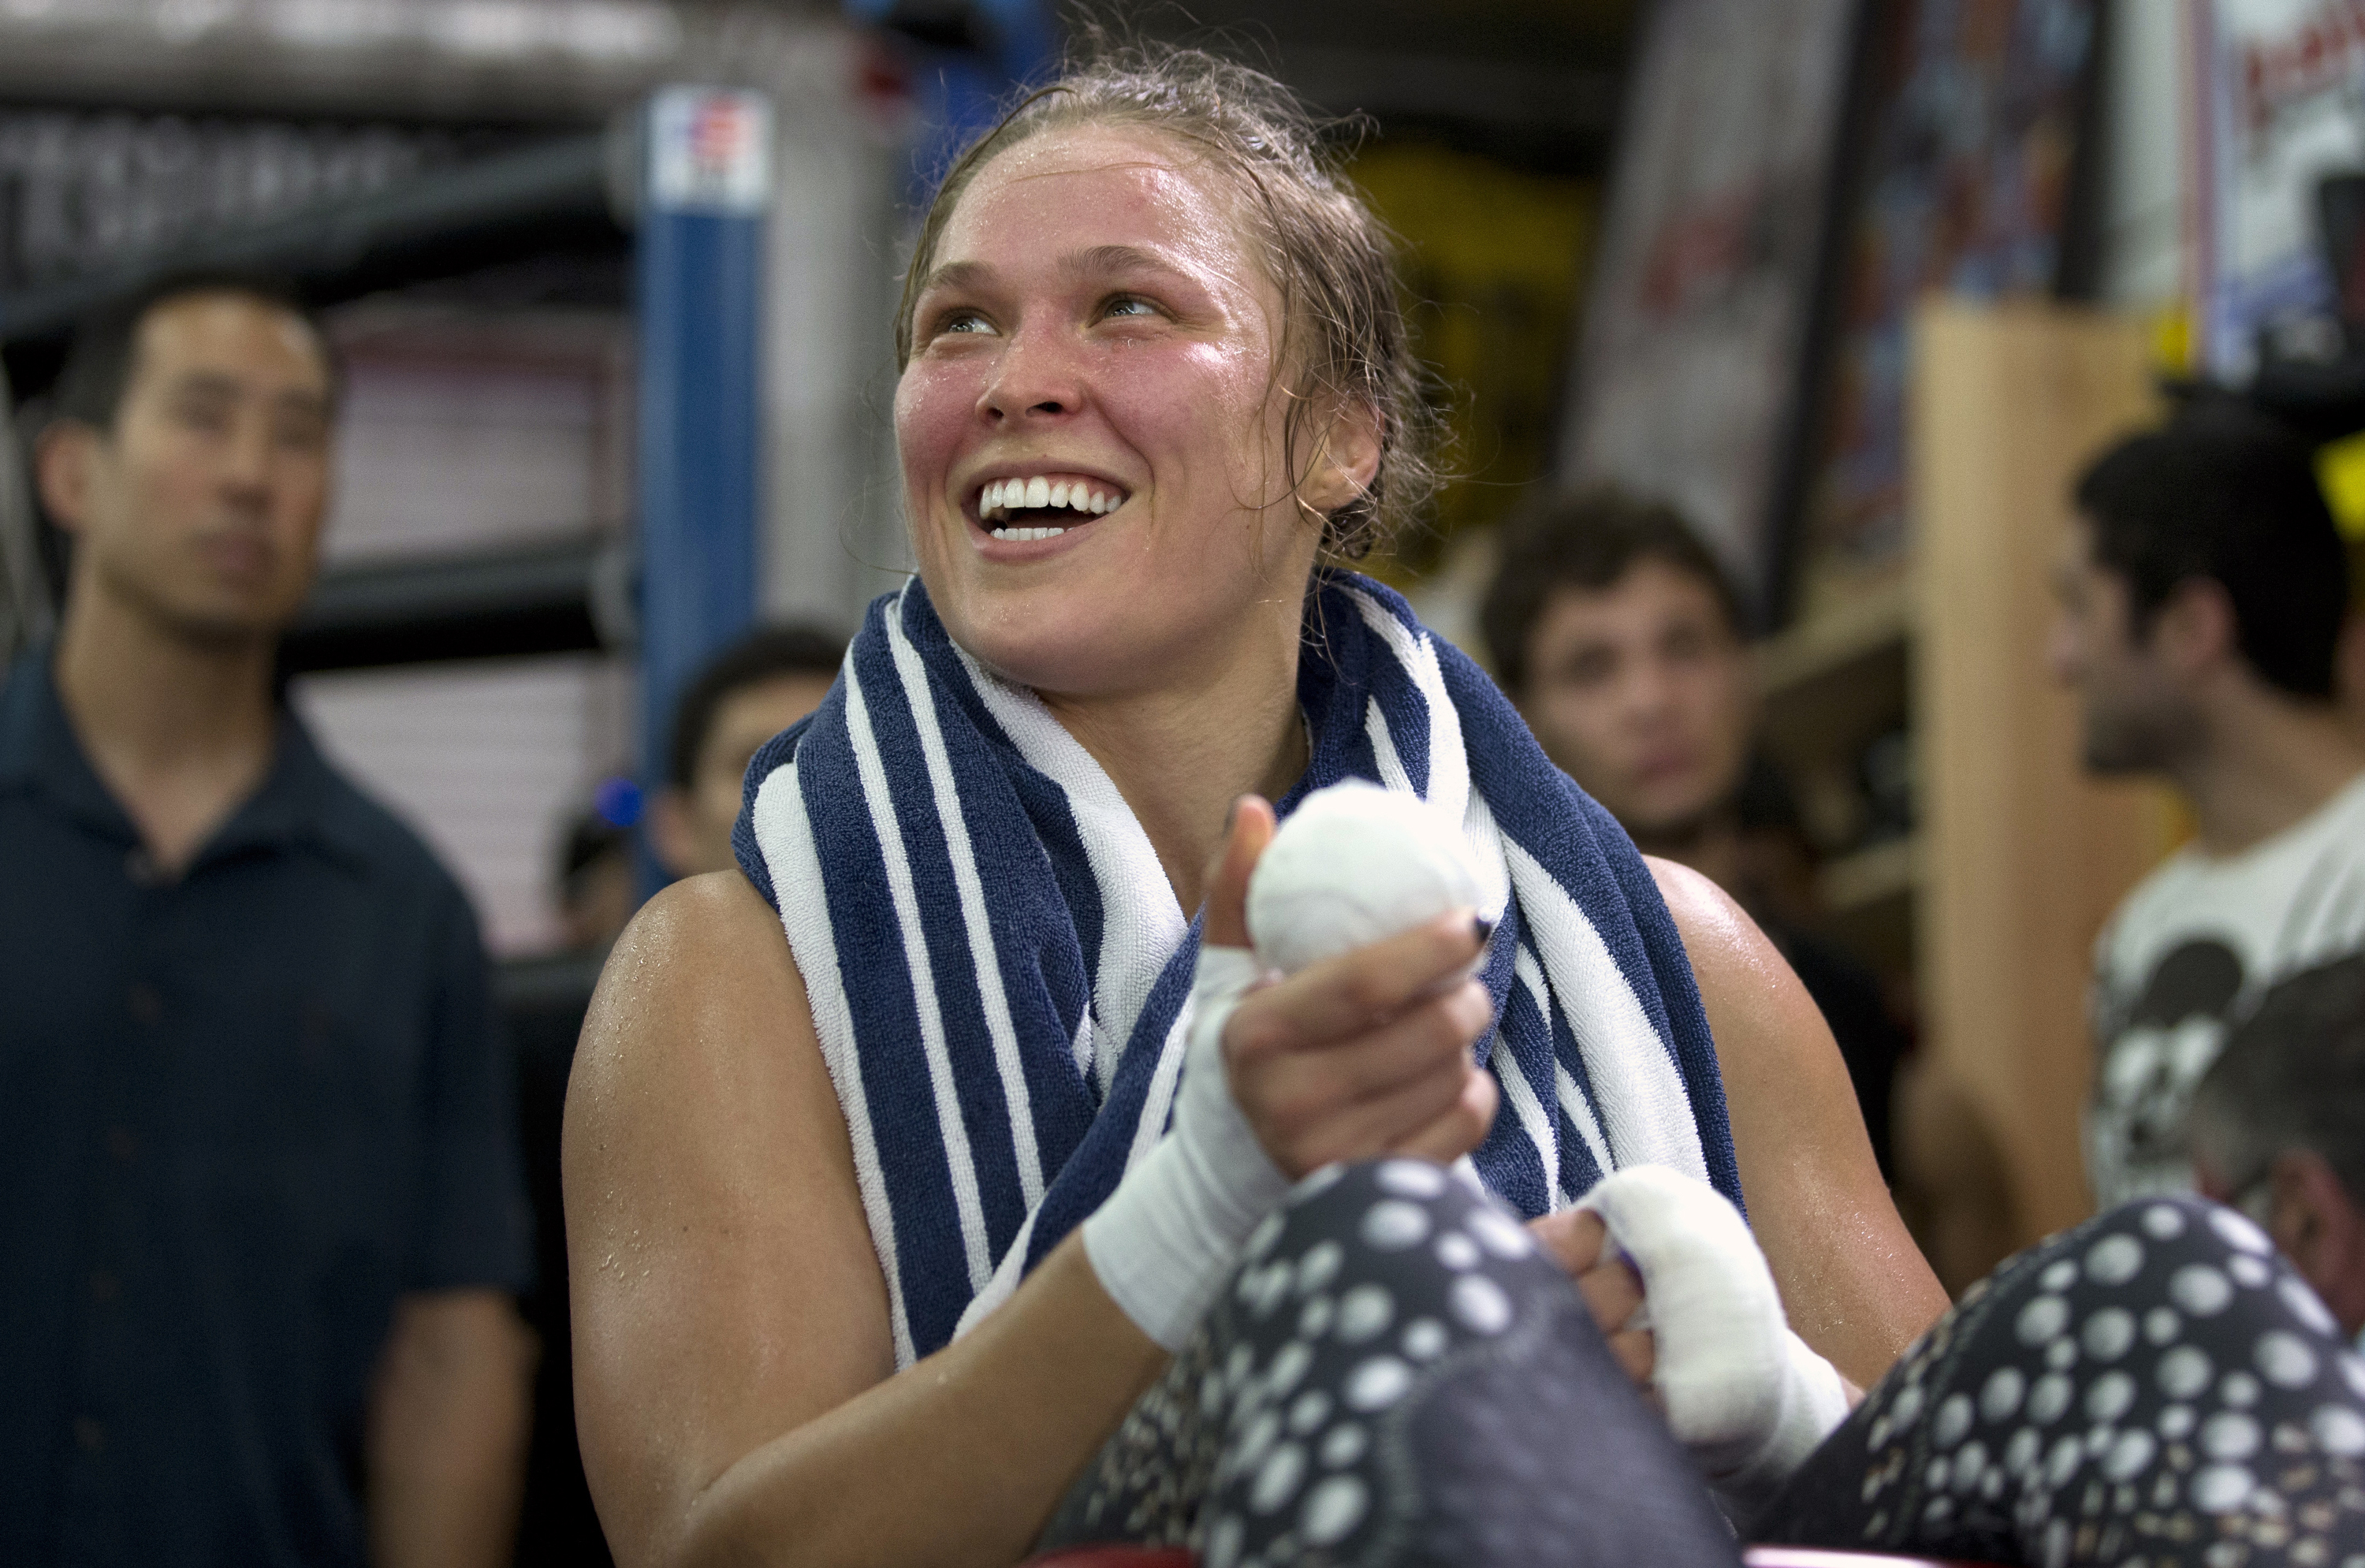 Mixed martial arts fighter Ronda Rousey smiles during her workout at Glendale Fighting Club, in Glendale, Calif. on July 15, 2015. (Jae C. Hong—AP)